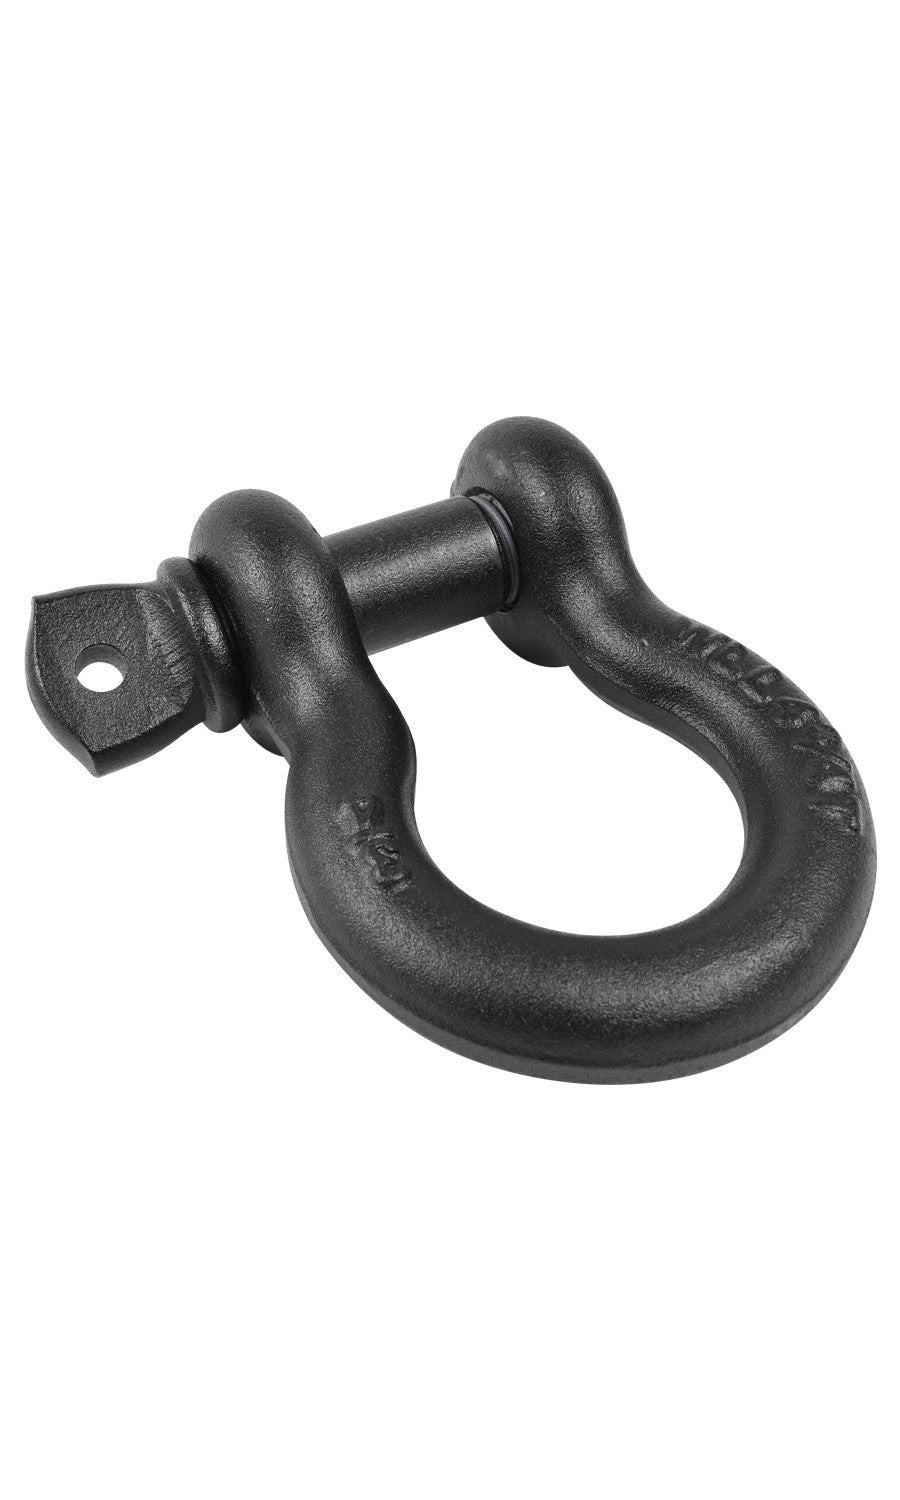 Soft Shackles, D-Rings, and hitch pins